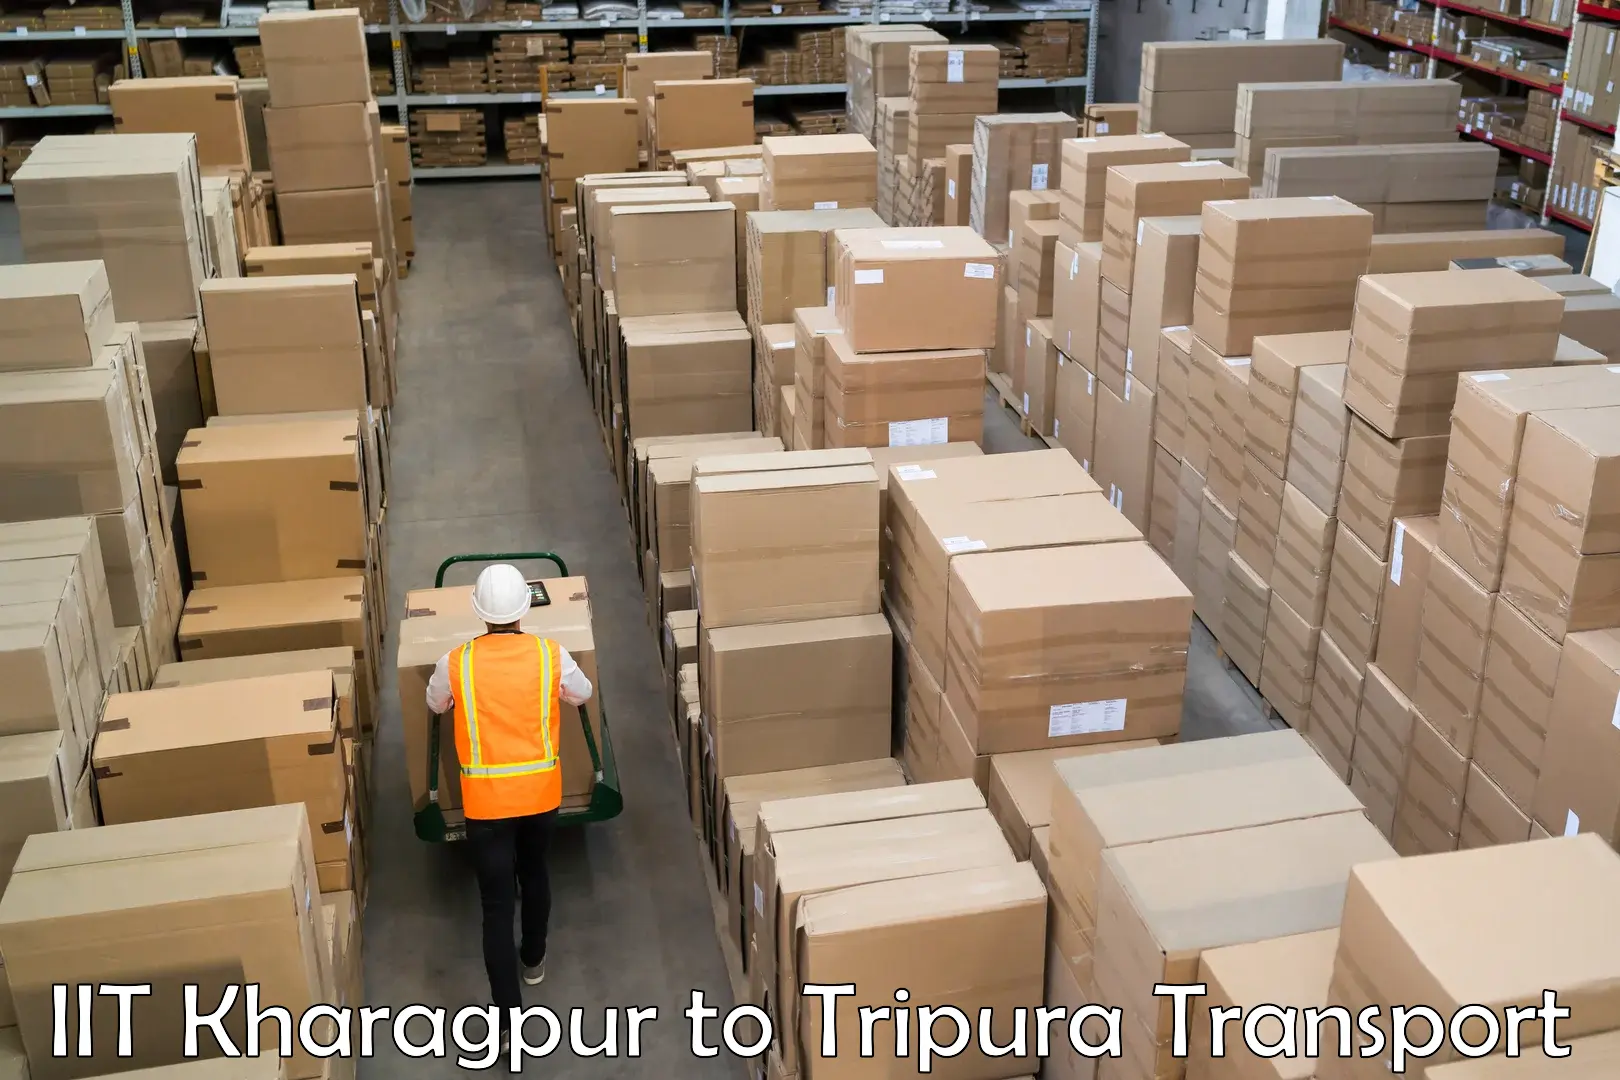 Commercial transport service IIT Kharagpur to Udaipur Tripura